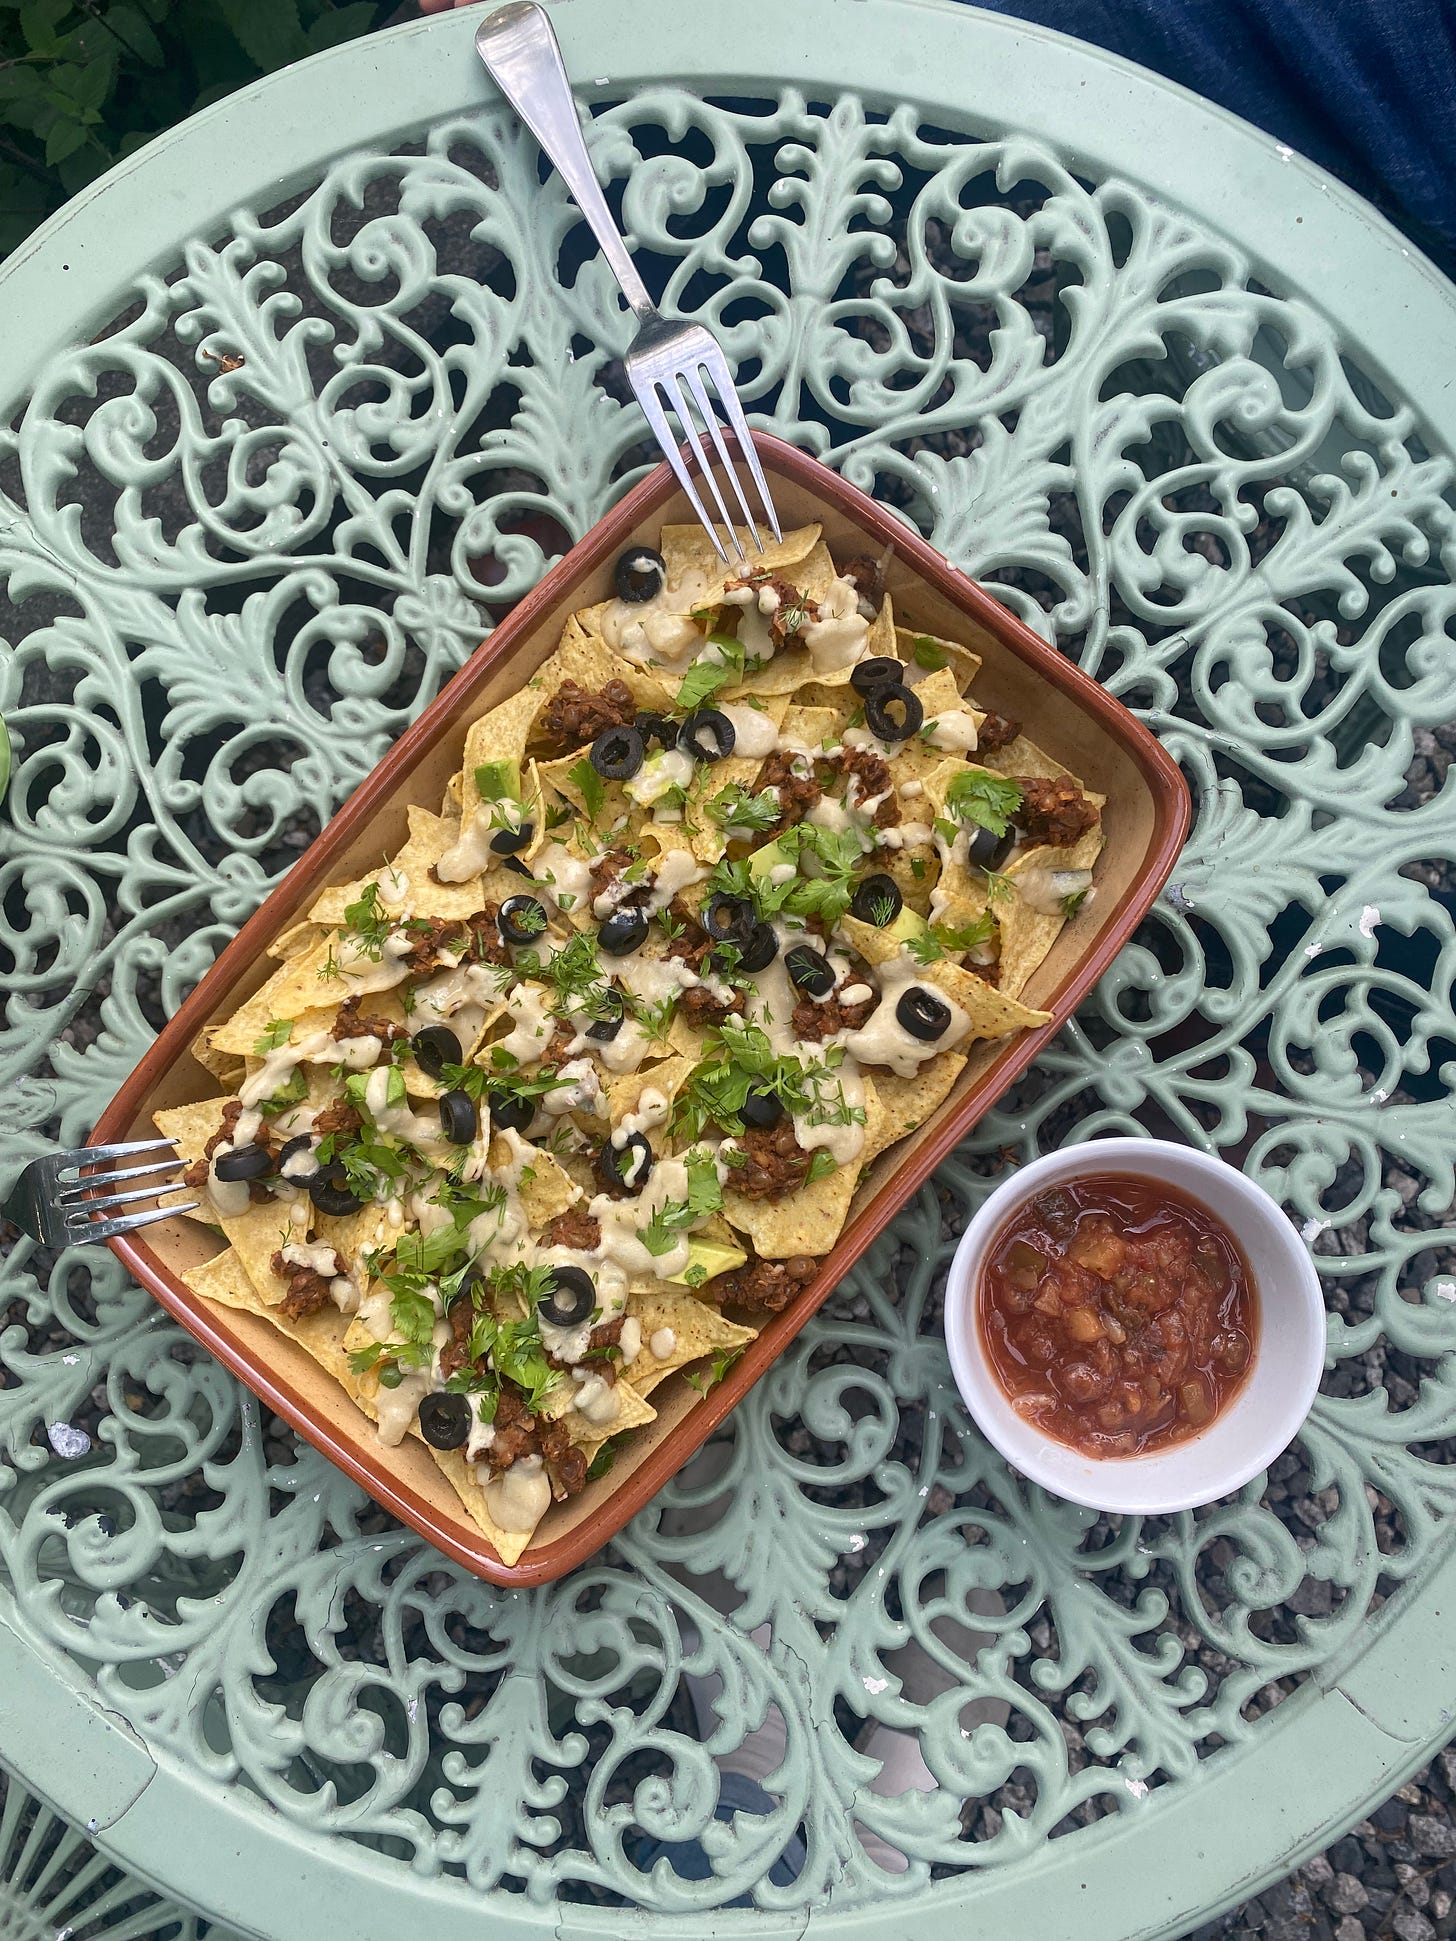 On a mint green outdoor café table, a rectangular stoneware dish of the nachos described above: queso, black olives, lentil meat, and cilantro spread over top. A small white dish of red salsa sits to the side.